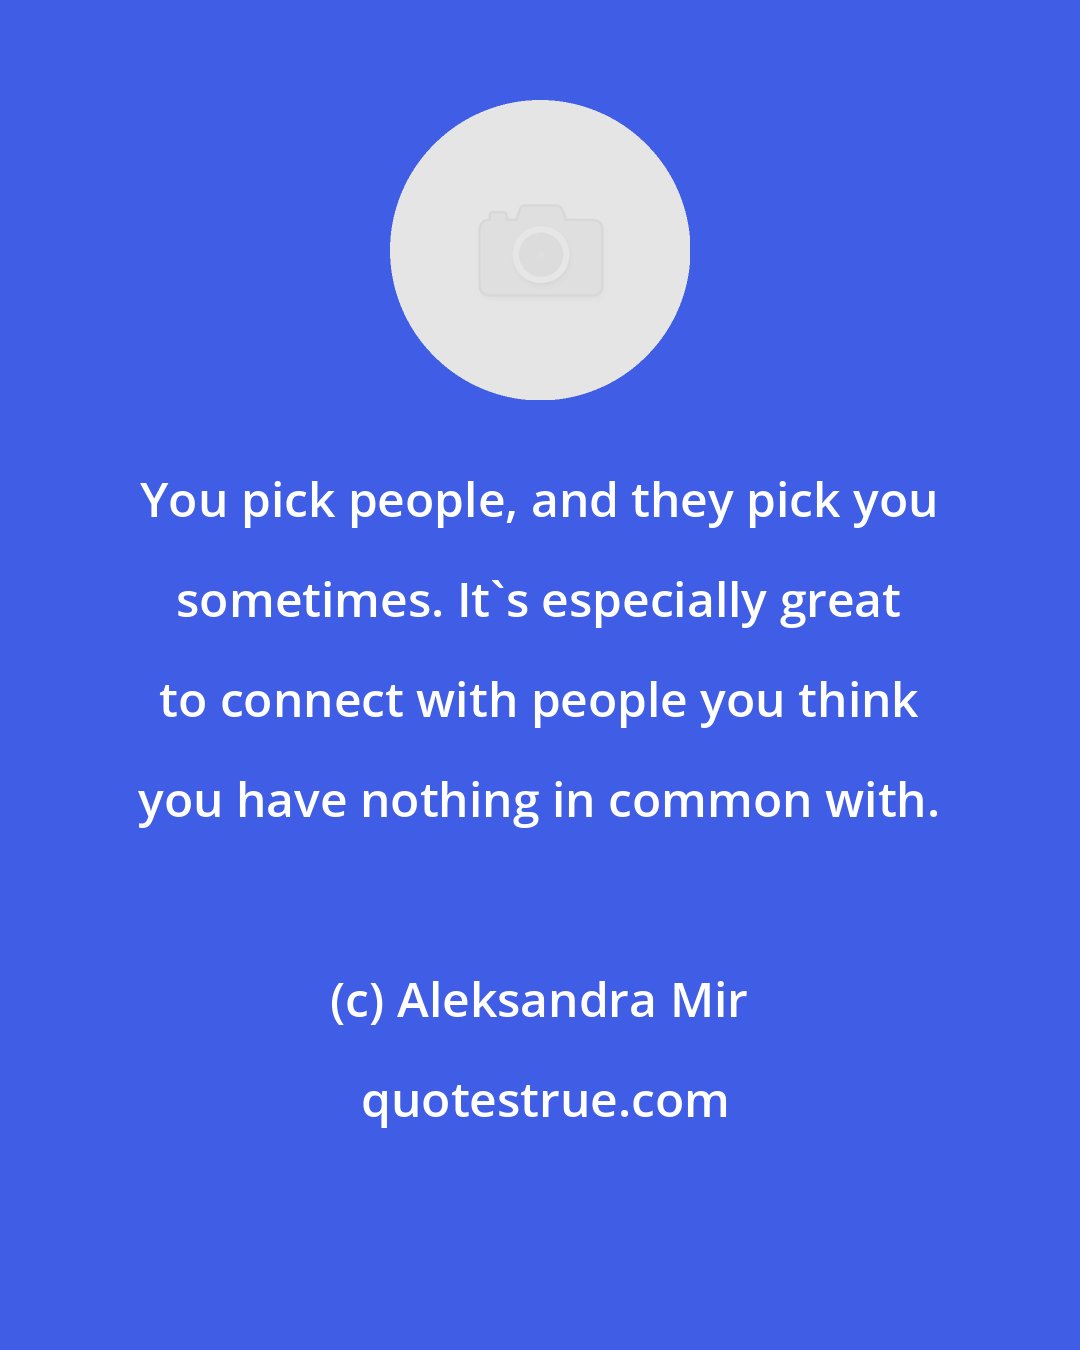 Aleksandra Mir: You pick people, and they pick you sometimes. It's especially great to connect with people you think you have nothing in common with.